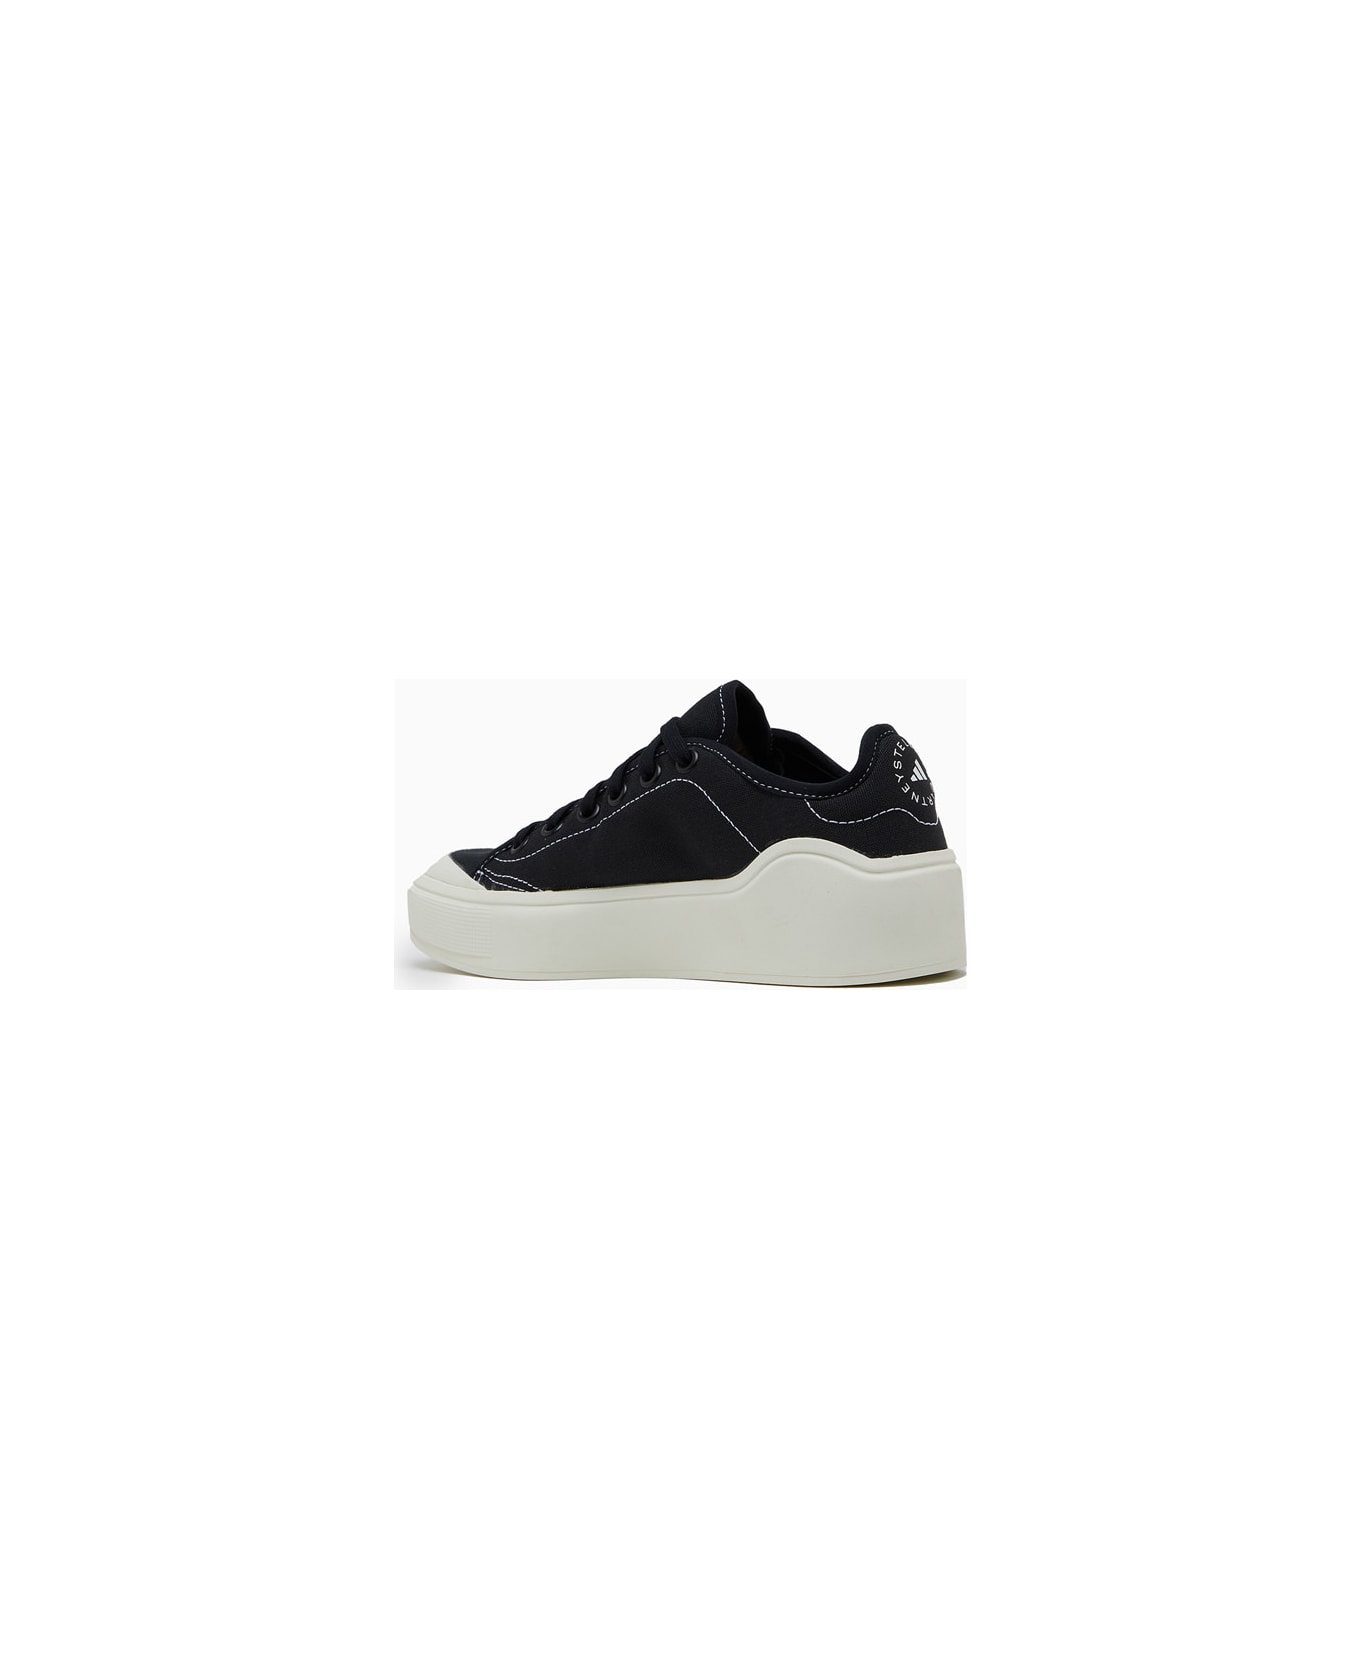 Adidas by Stella McCartney Court Cotton Sneakers Hp5702 - Black